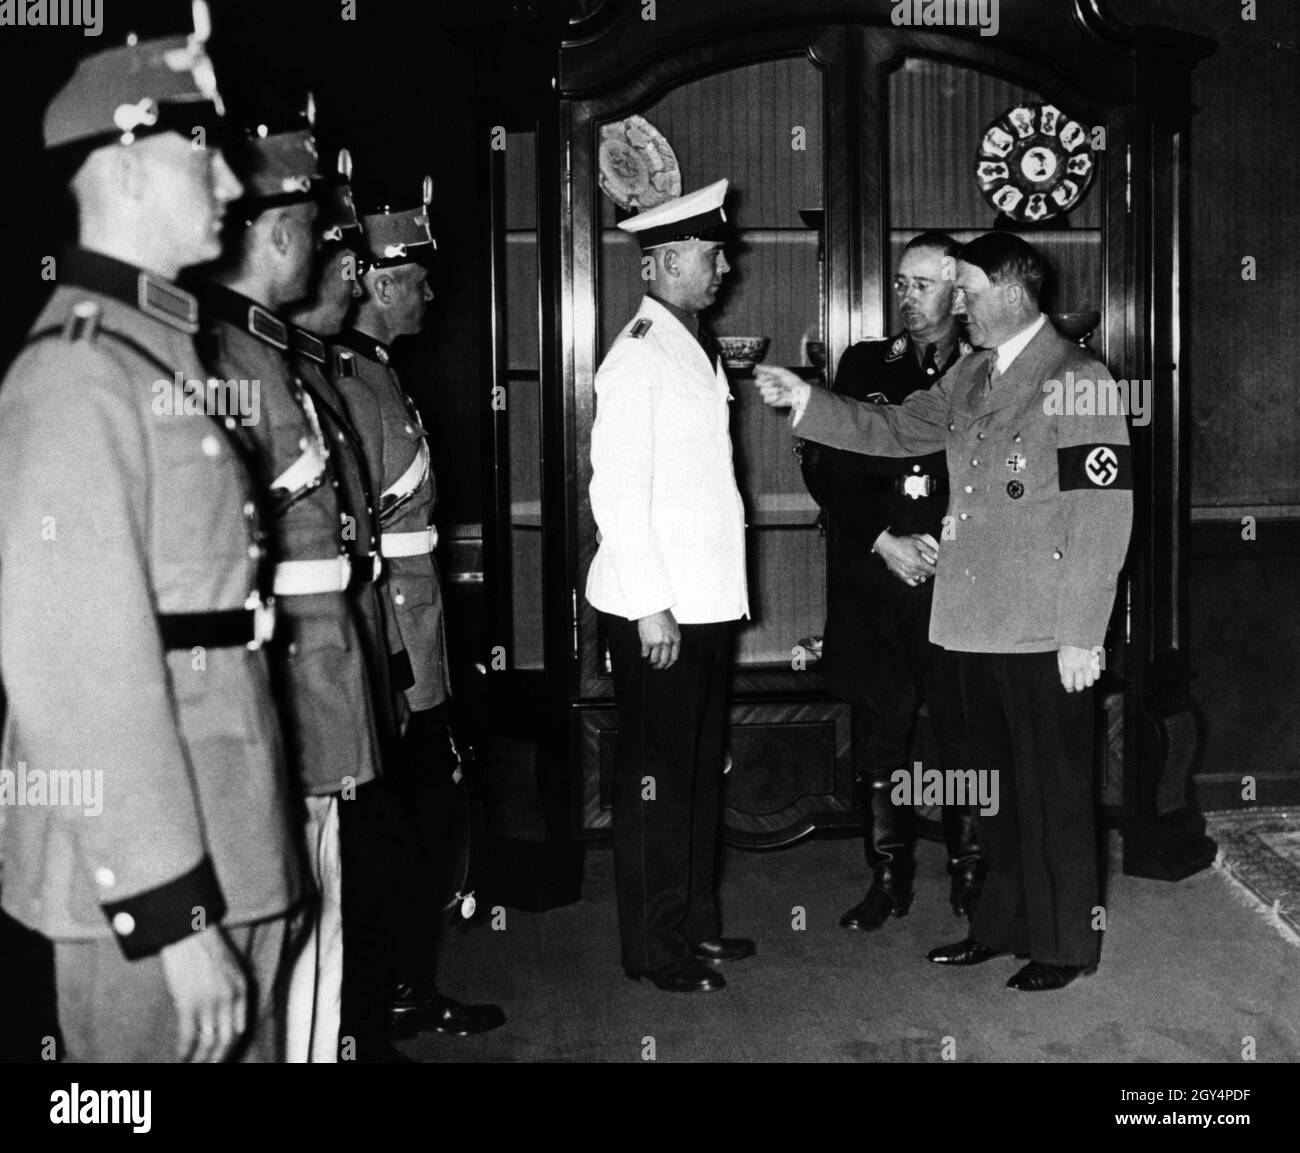 Reichsführer SS and Chief of the German Police Heinrich Himmler shows Adolf Hitler new designs of police uniforms. Members of the Ordnungspolizei like these were also involved in the massacres on the Eastern Front as part of Reserve Battalions and provided political terror at home by the Nazi regime. [automated translation] Stock Photo